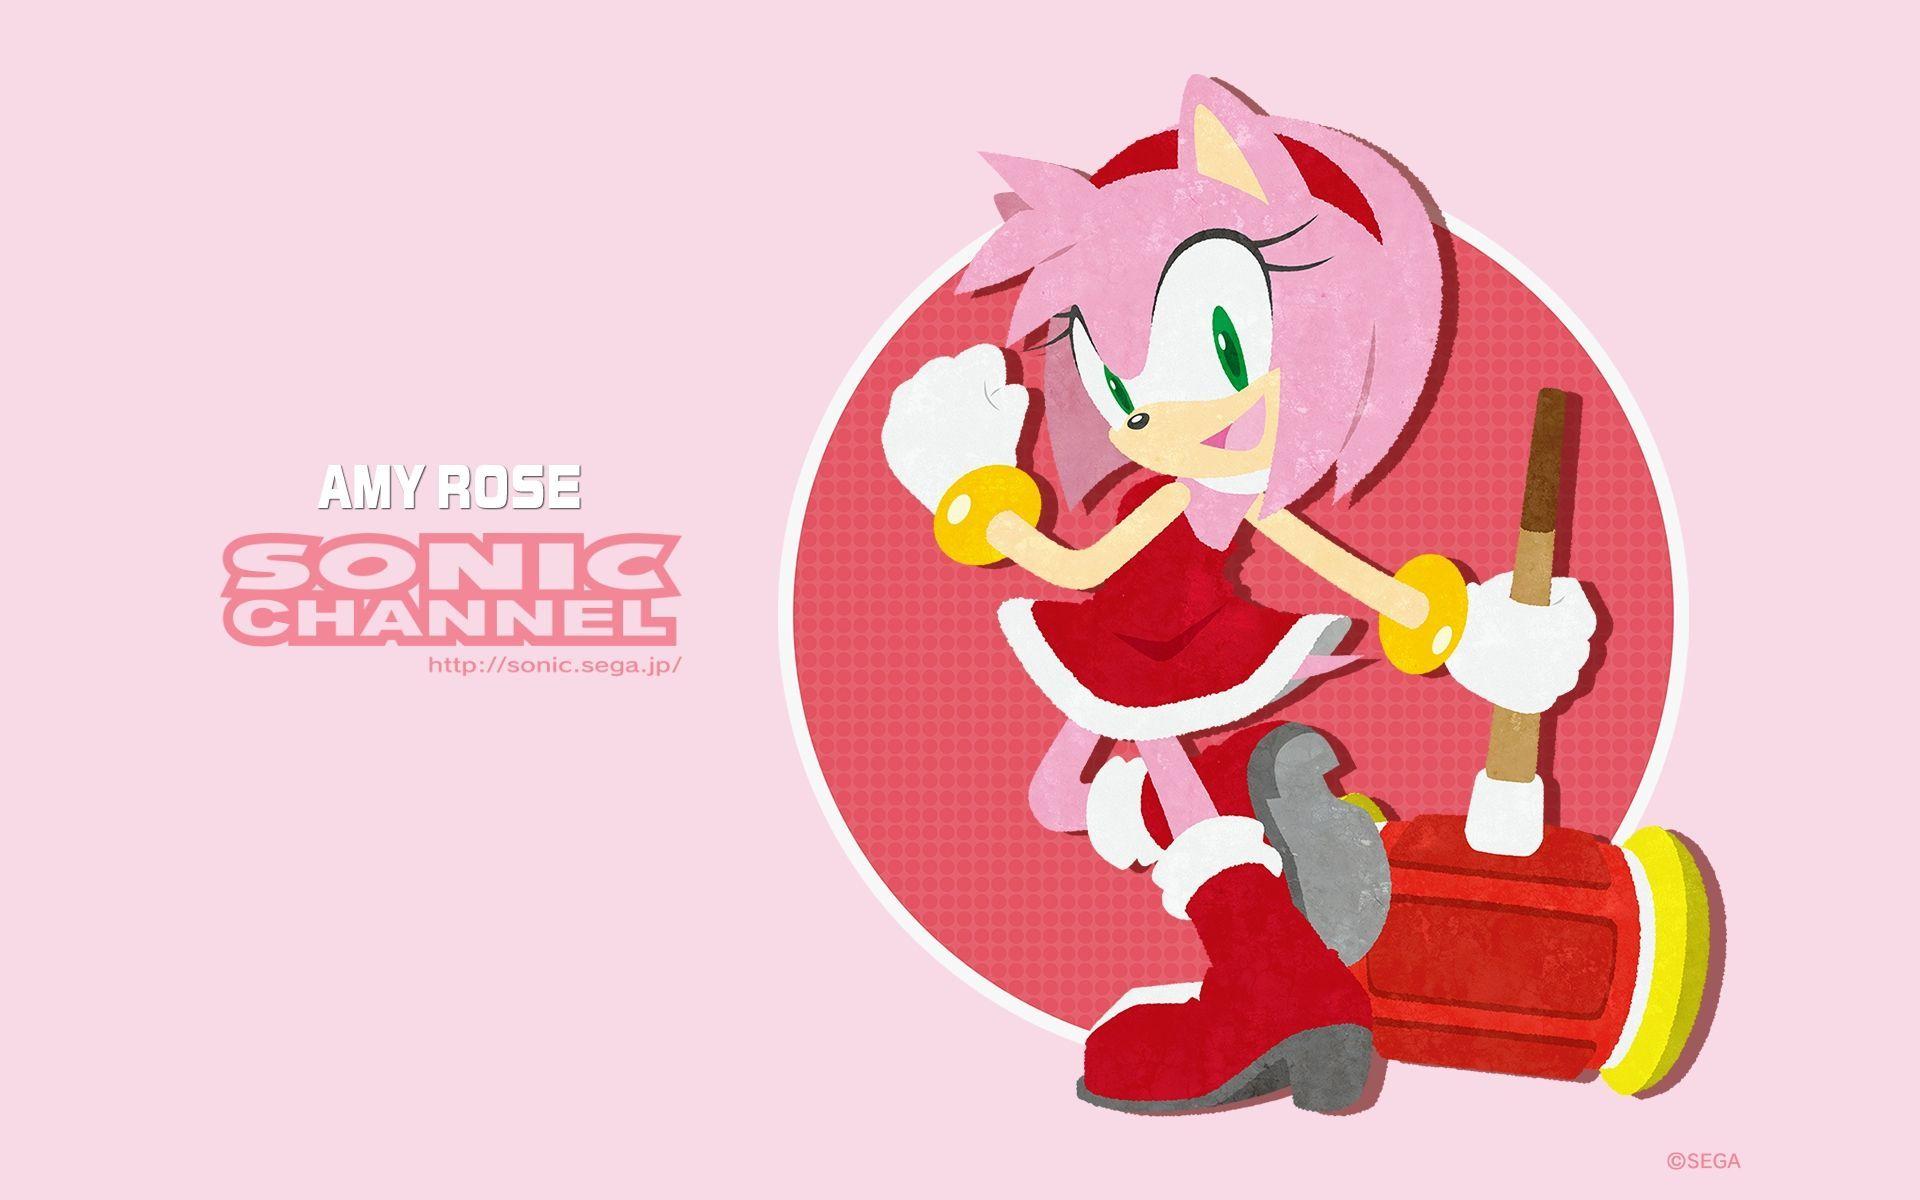 HD wallpaper Amy Amy Rose Sonic Sonic the Hedgehog PC gaming comic  art  Wallpaper Flare